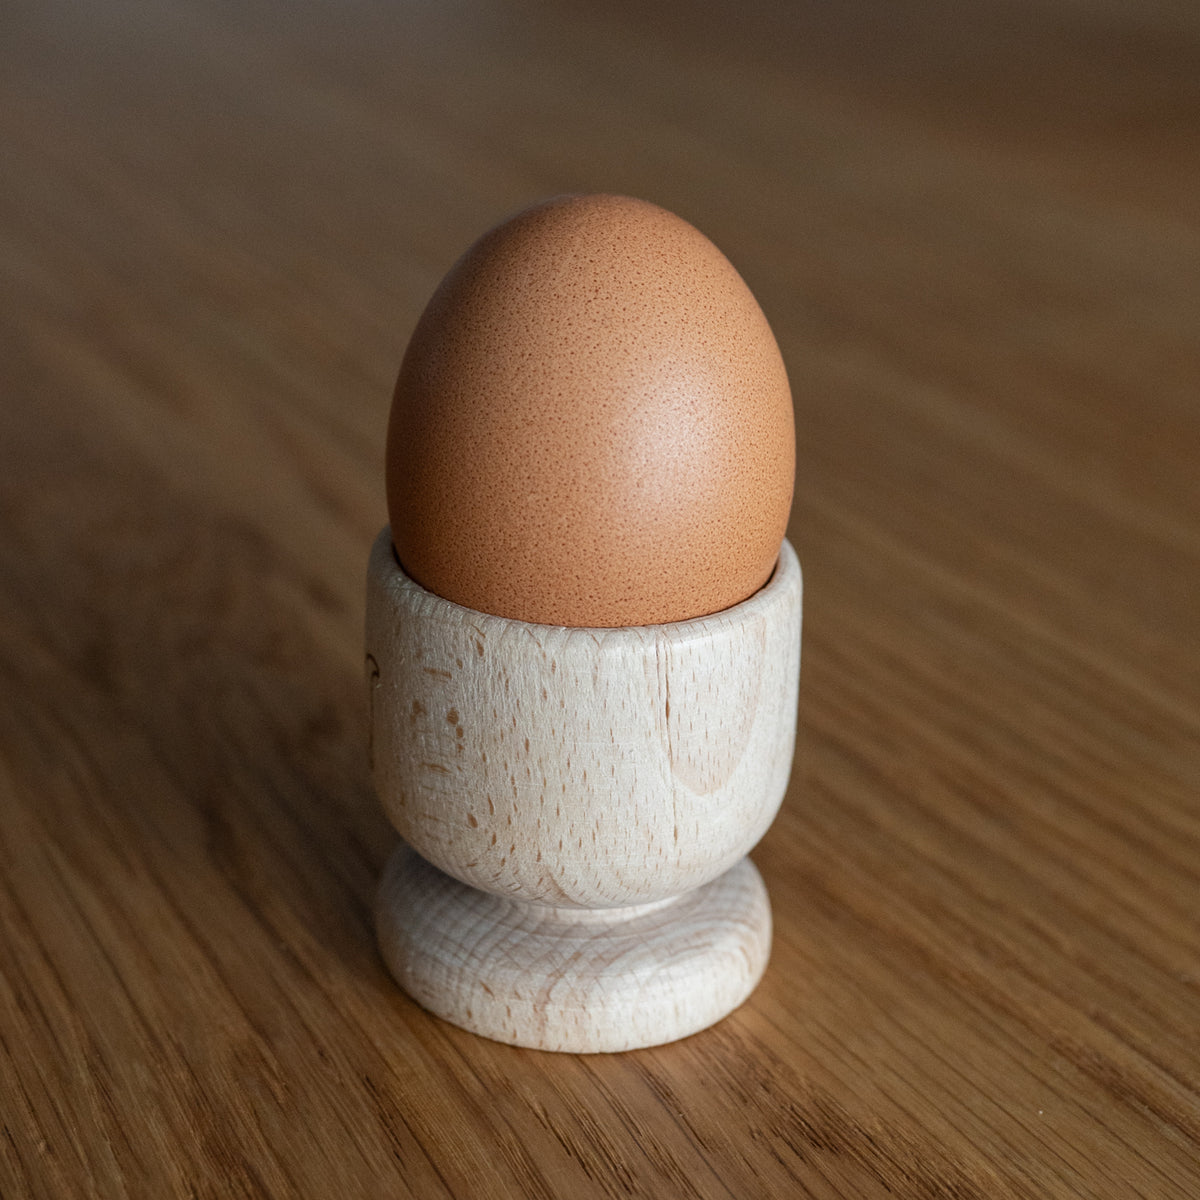 1 x Additional Egg Cup